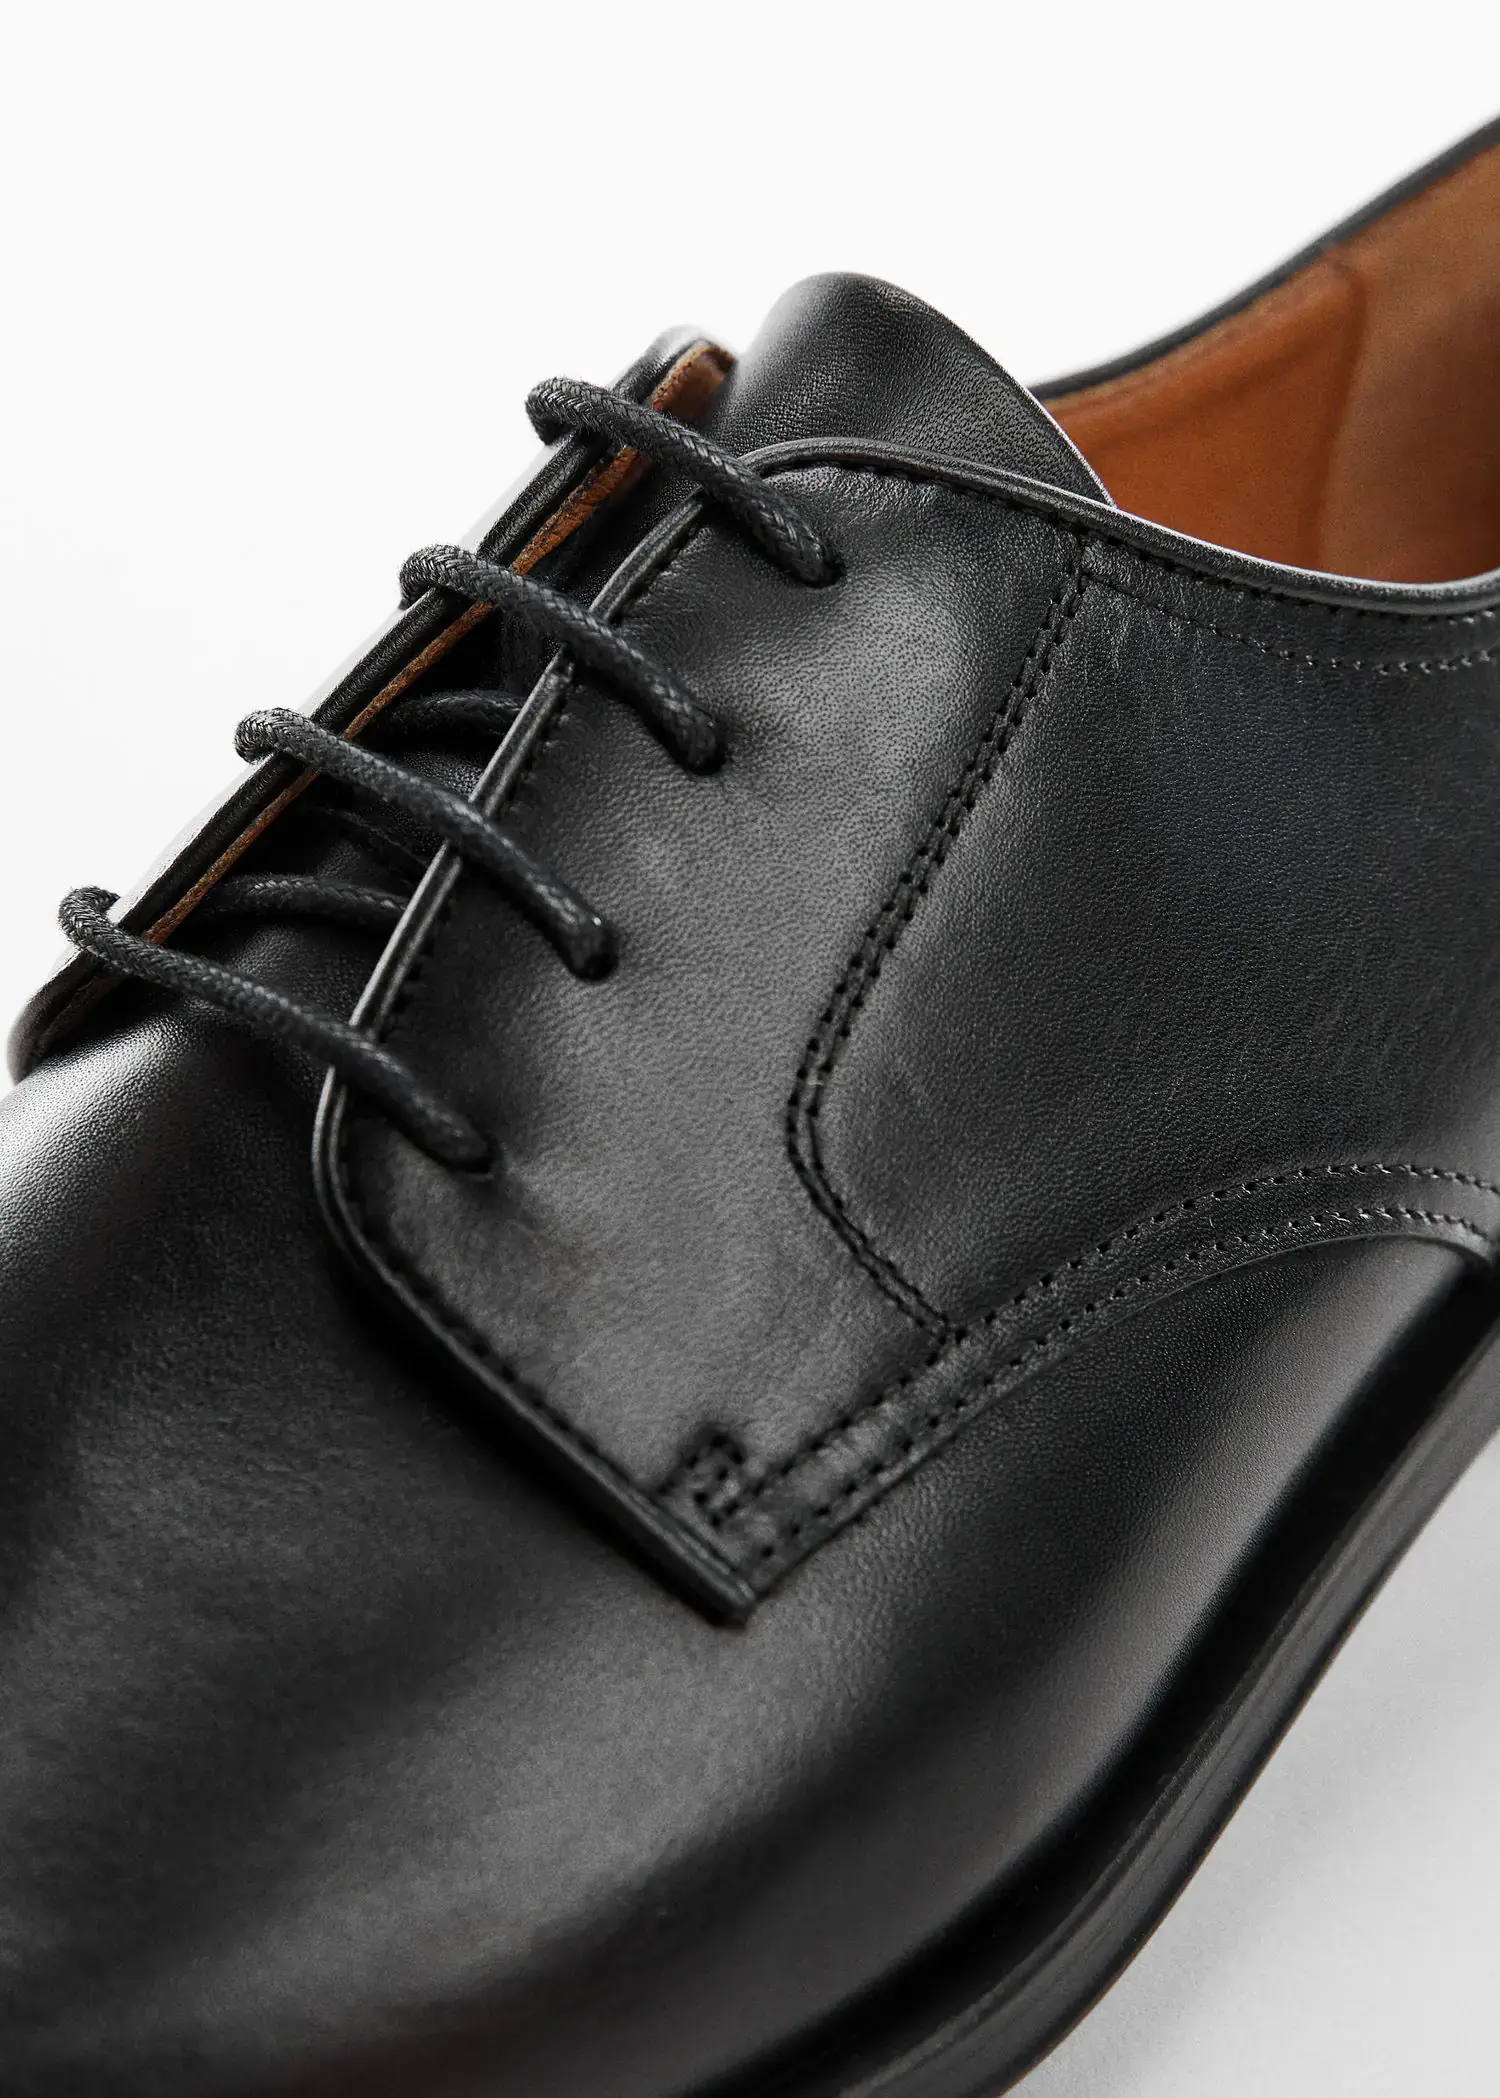 Mango Leather suit shoes. a close-up view of a pair of black shoes. 